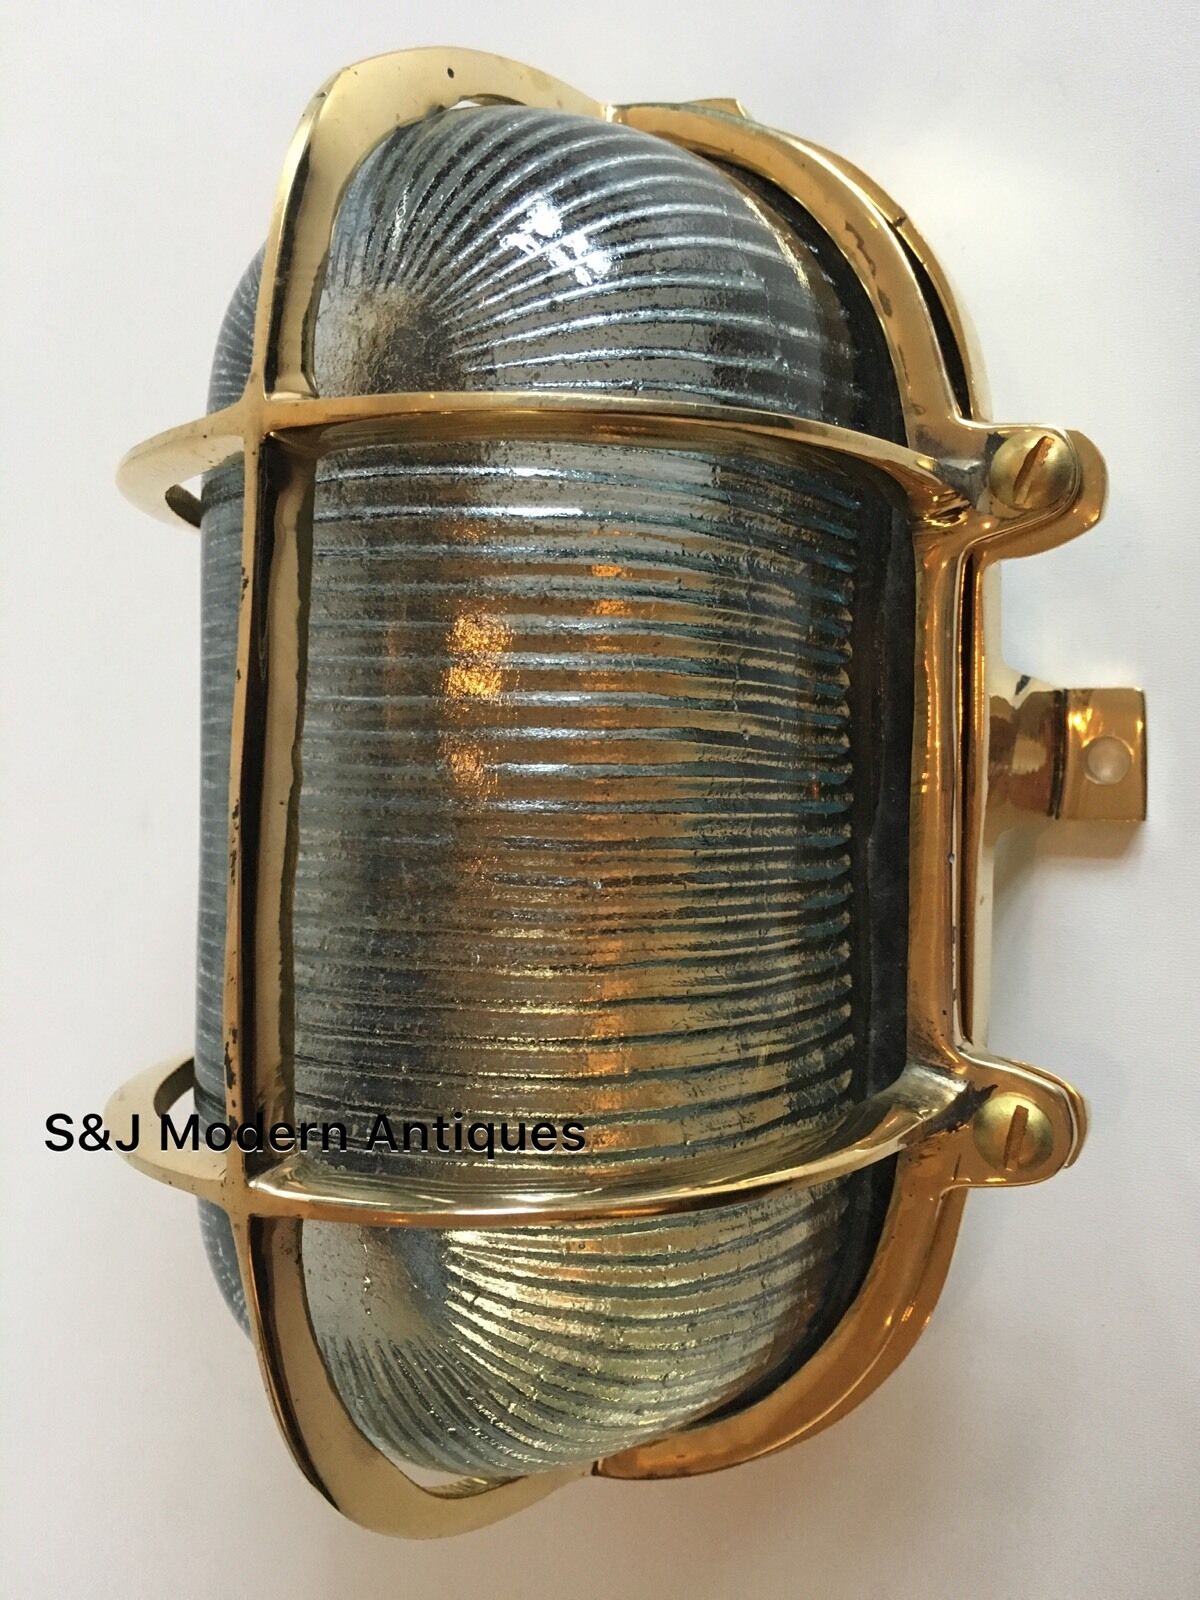 Gold Brass Industrial Bulkhead Wall Light Ceiling Vintage Antique Ship Lamp Old